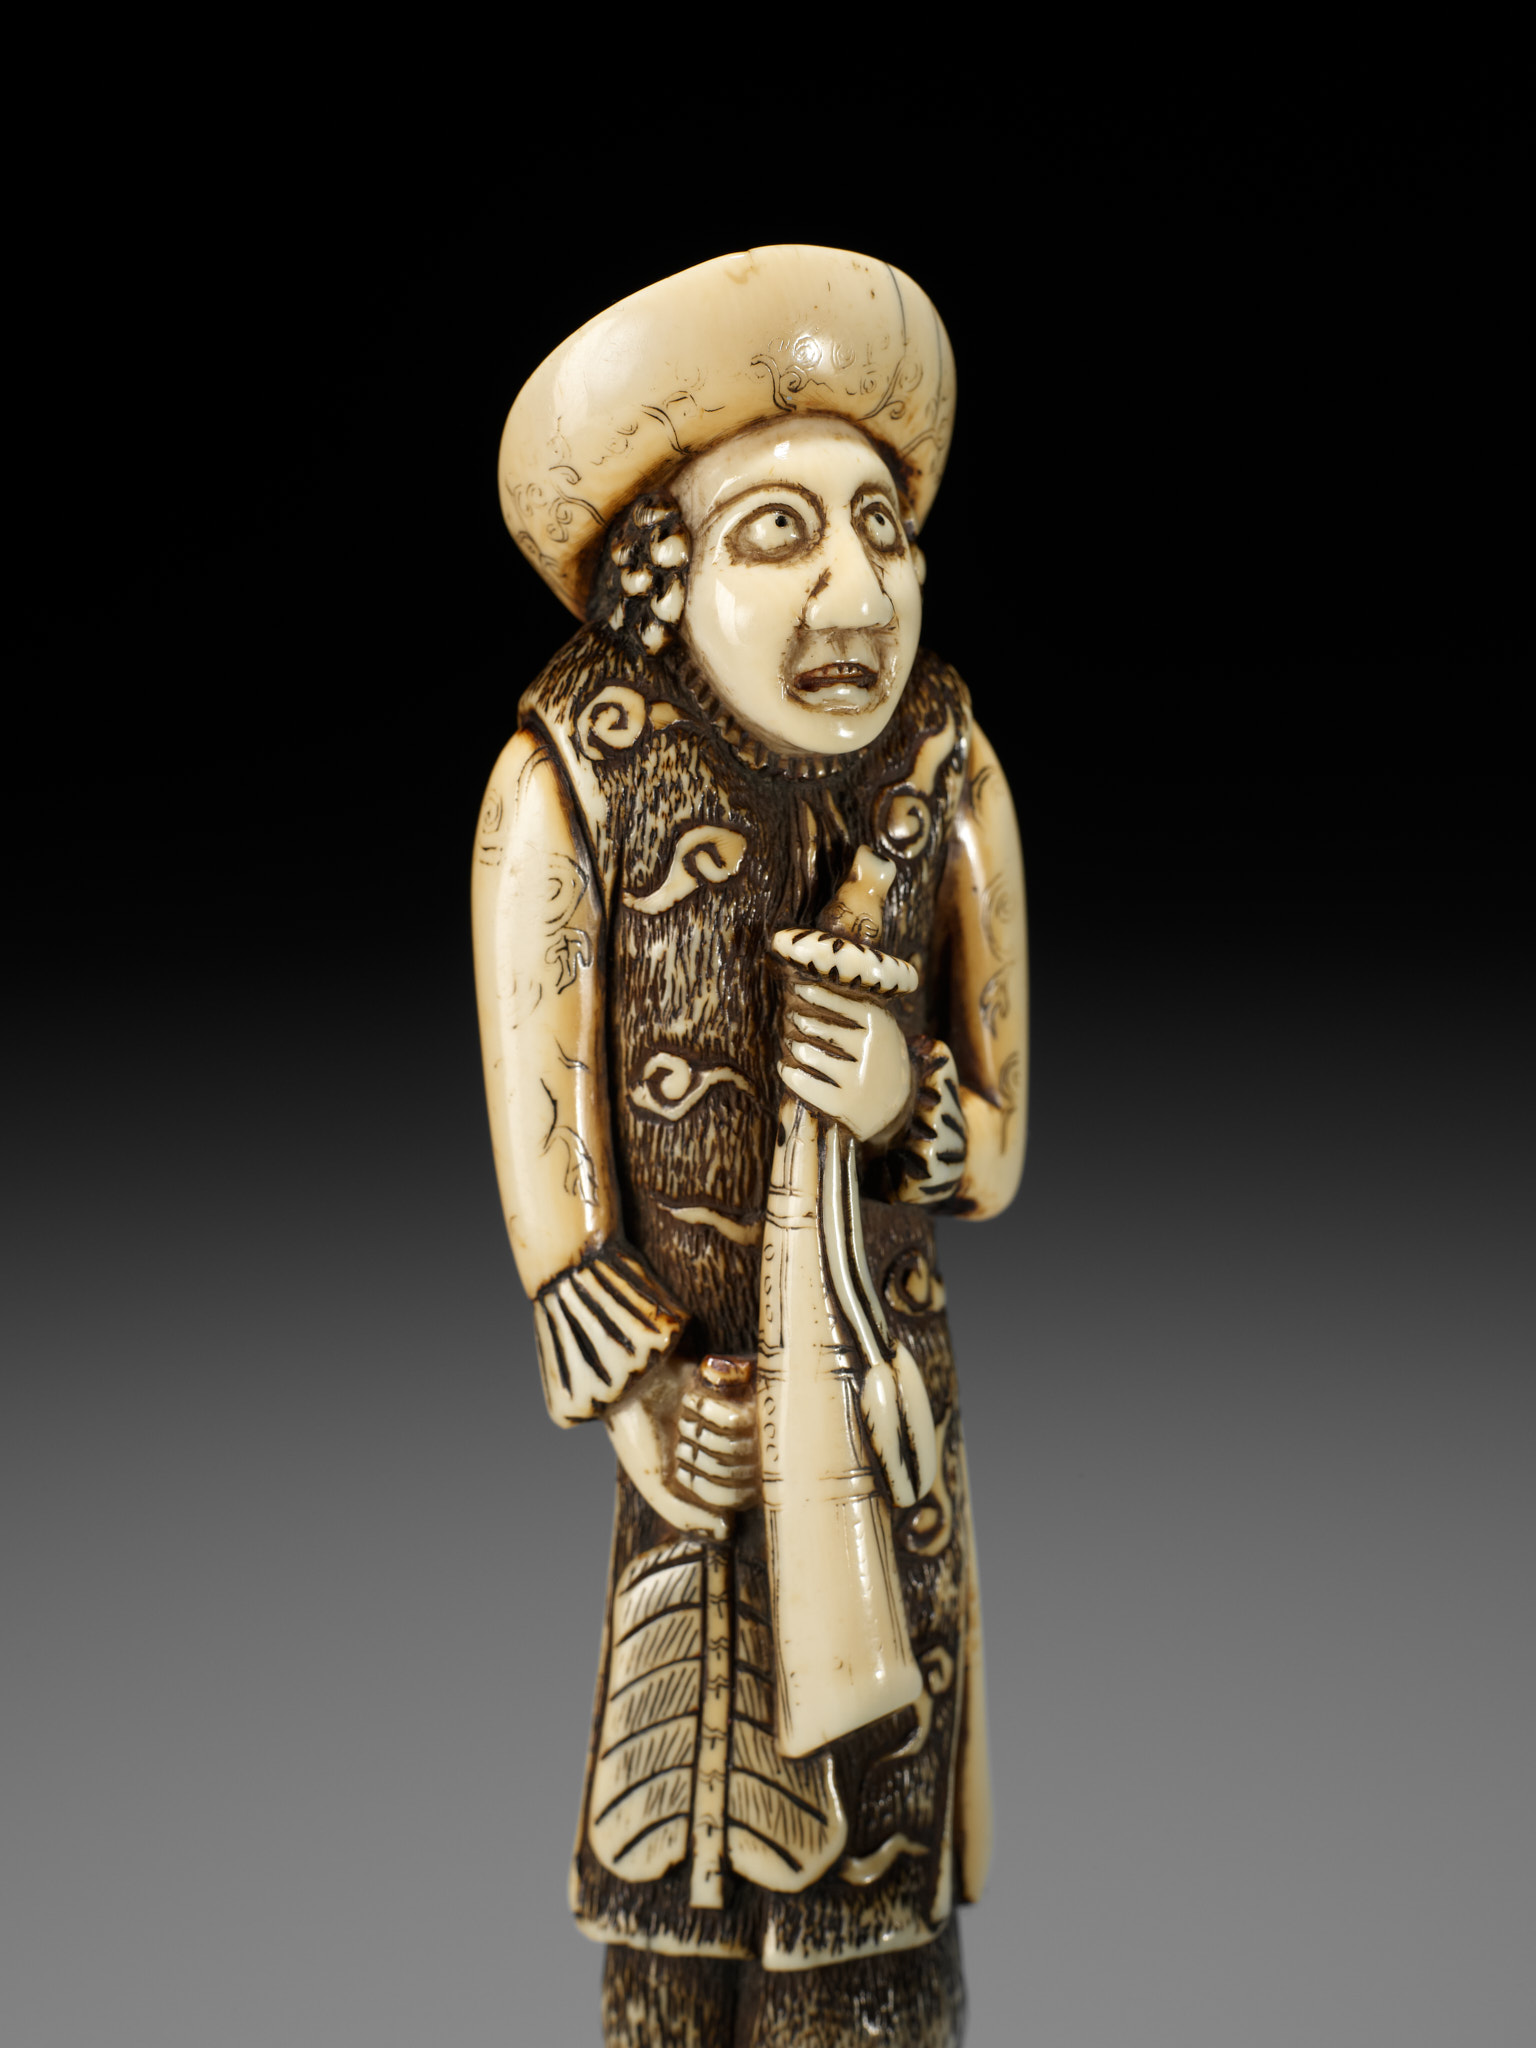 A SUPERB AND LARGE IVORY NETSUKE OF A DUTCHMAN WITH A TRUMPET - Image 17 of 21